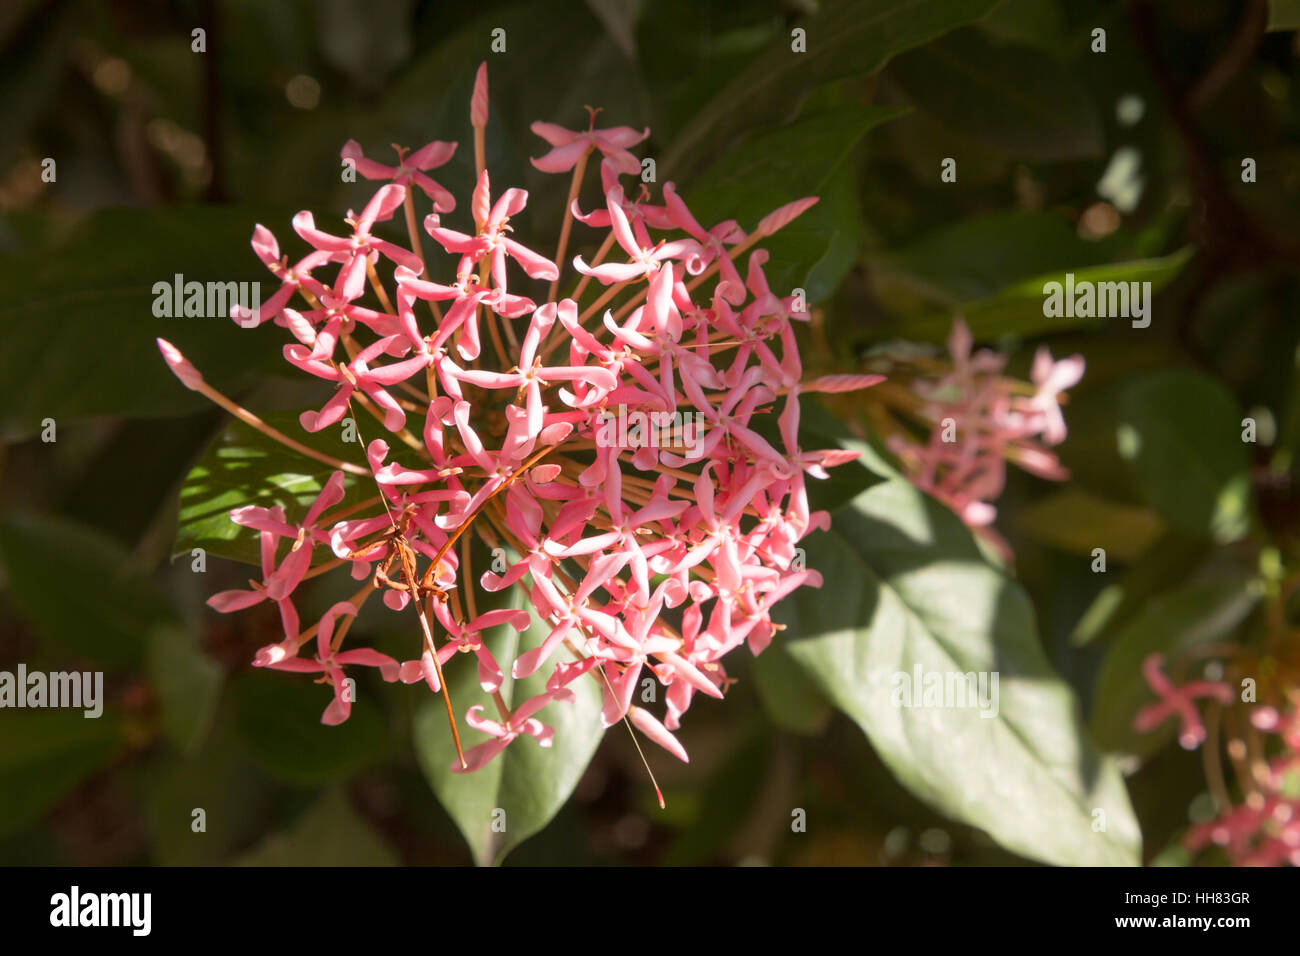 A pink flower (Ixora sp.) blooming under sunshine is seen during hot, sunny day in Asuncion, Paraguay Stock Photo